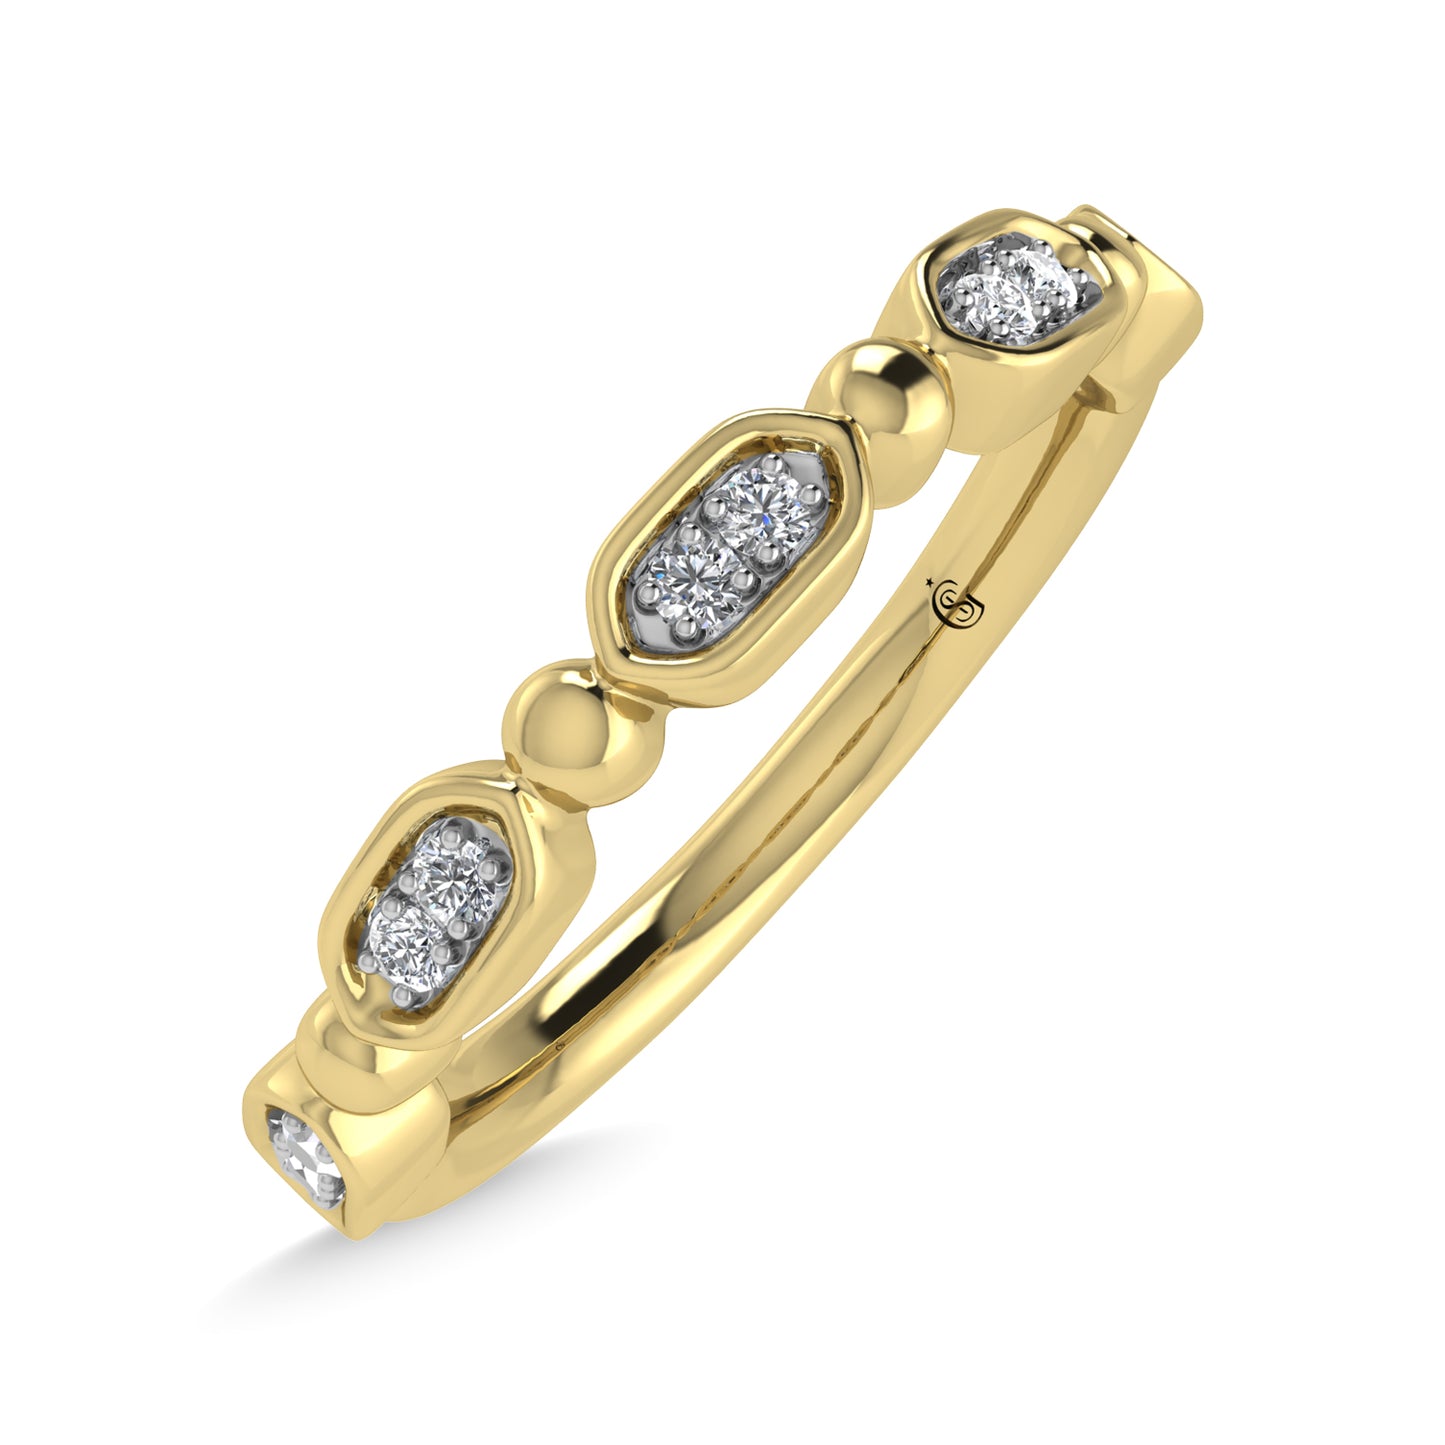 14K Yellow Gold Diamond Stackable Band